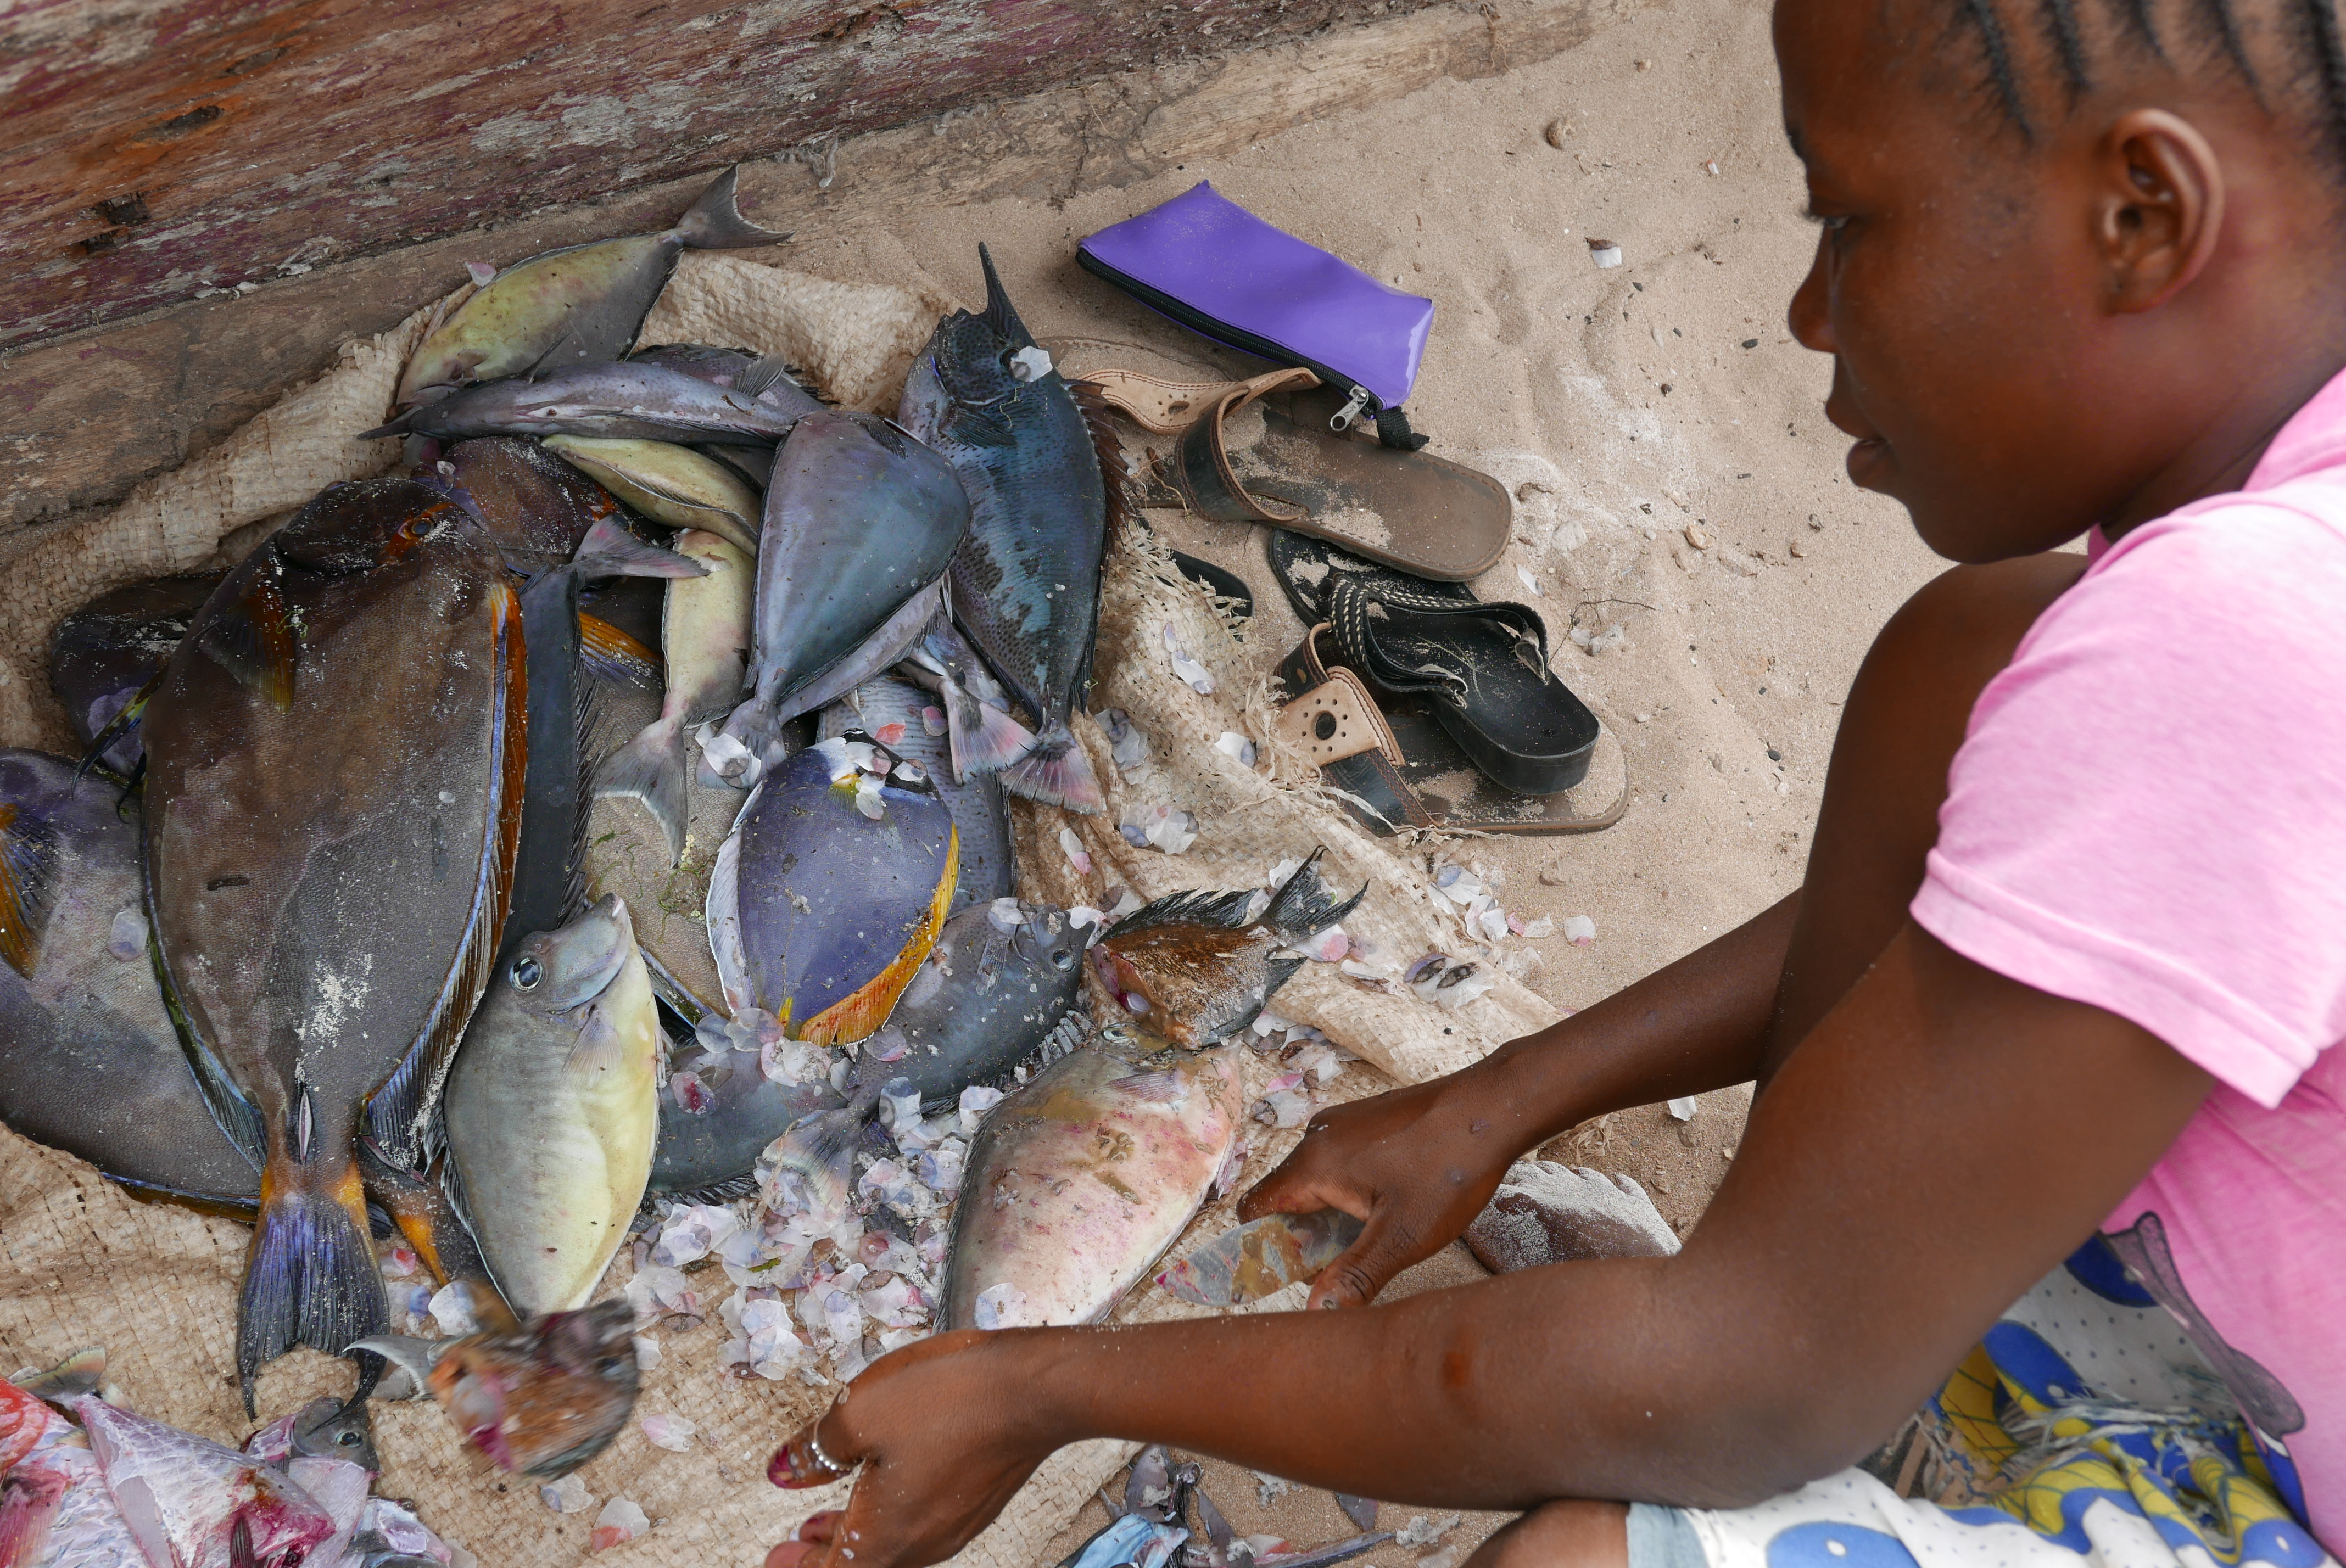 A girl in a village collects fish for her next meal